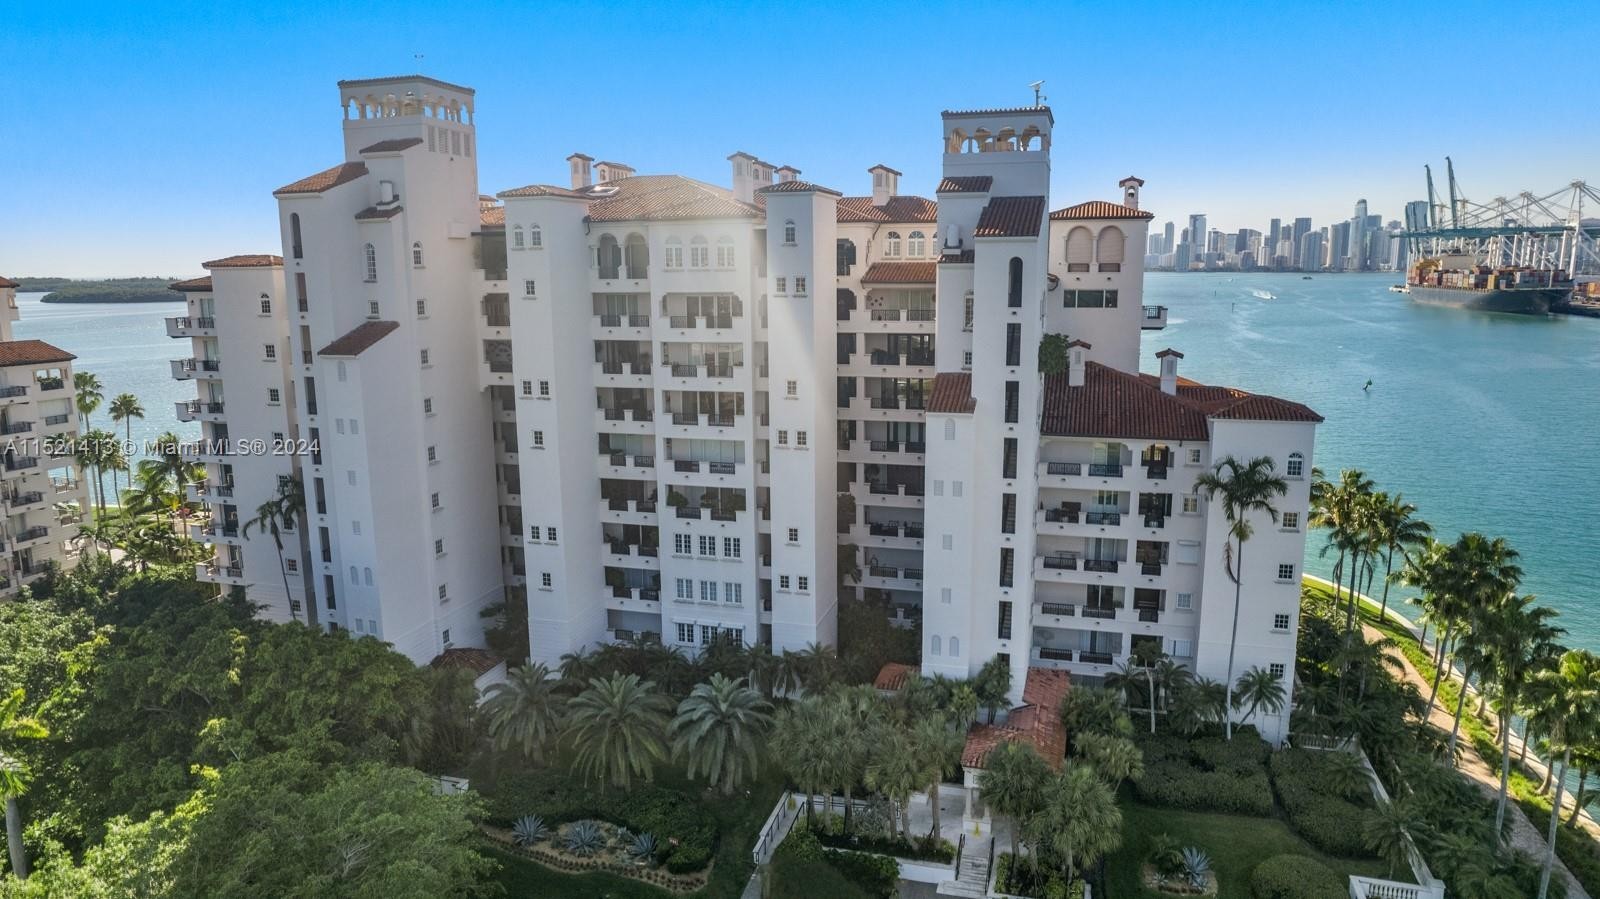 44. 5365 Fisher Island Dr